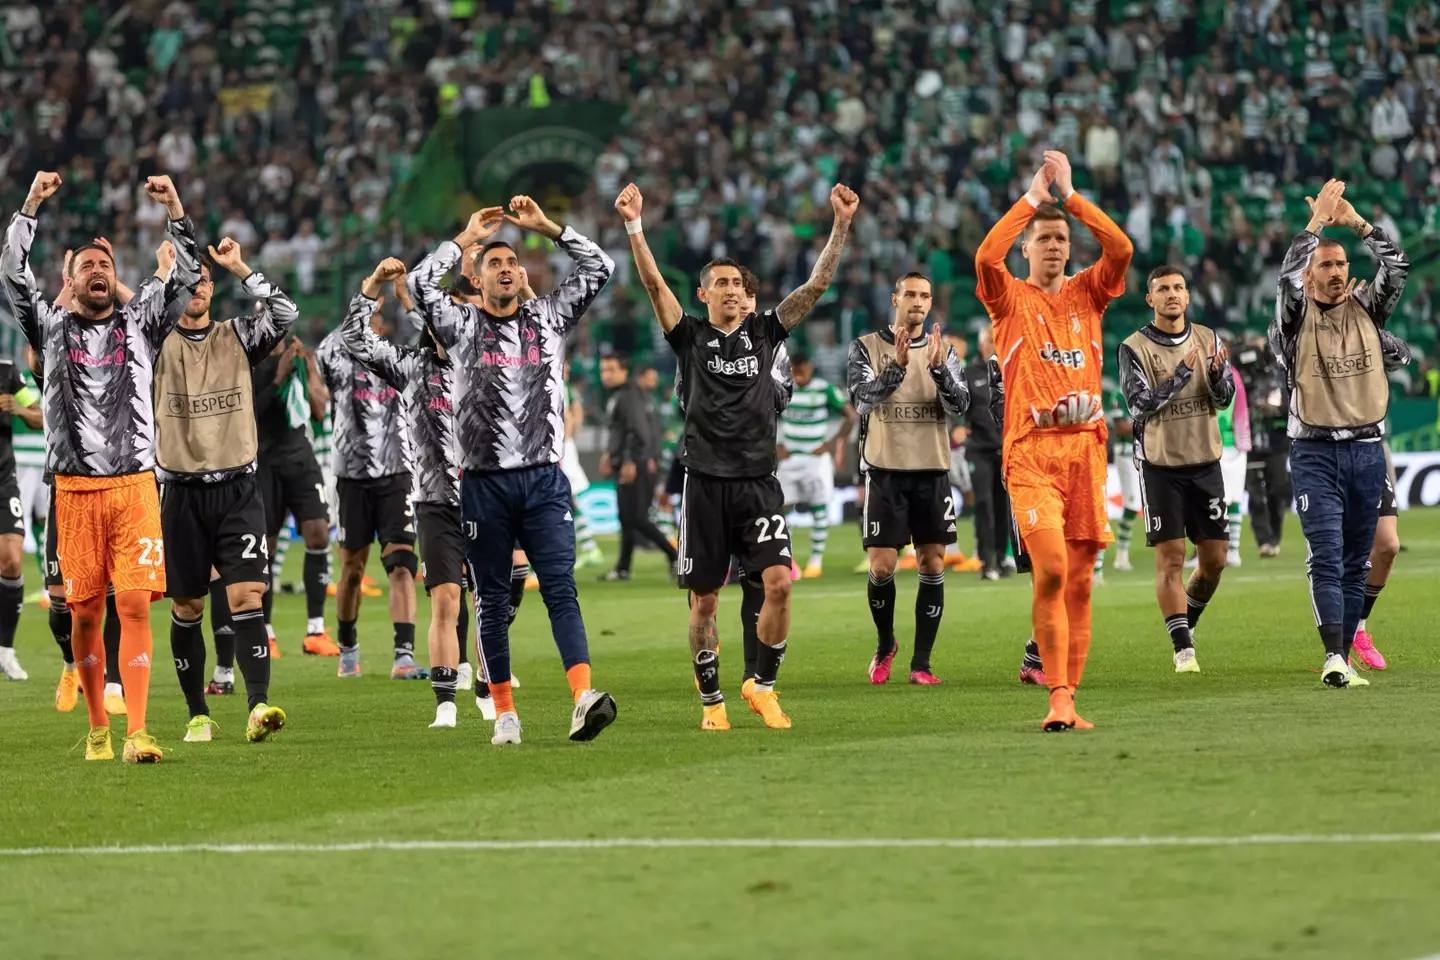 Juve players after confirming their place in the Europa League semis. Image: Alamy